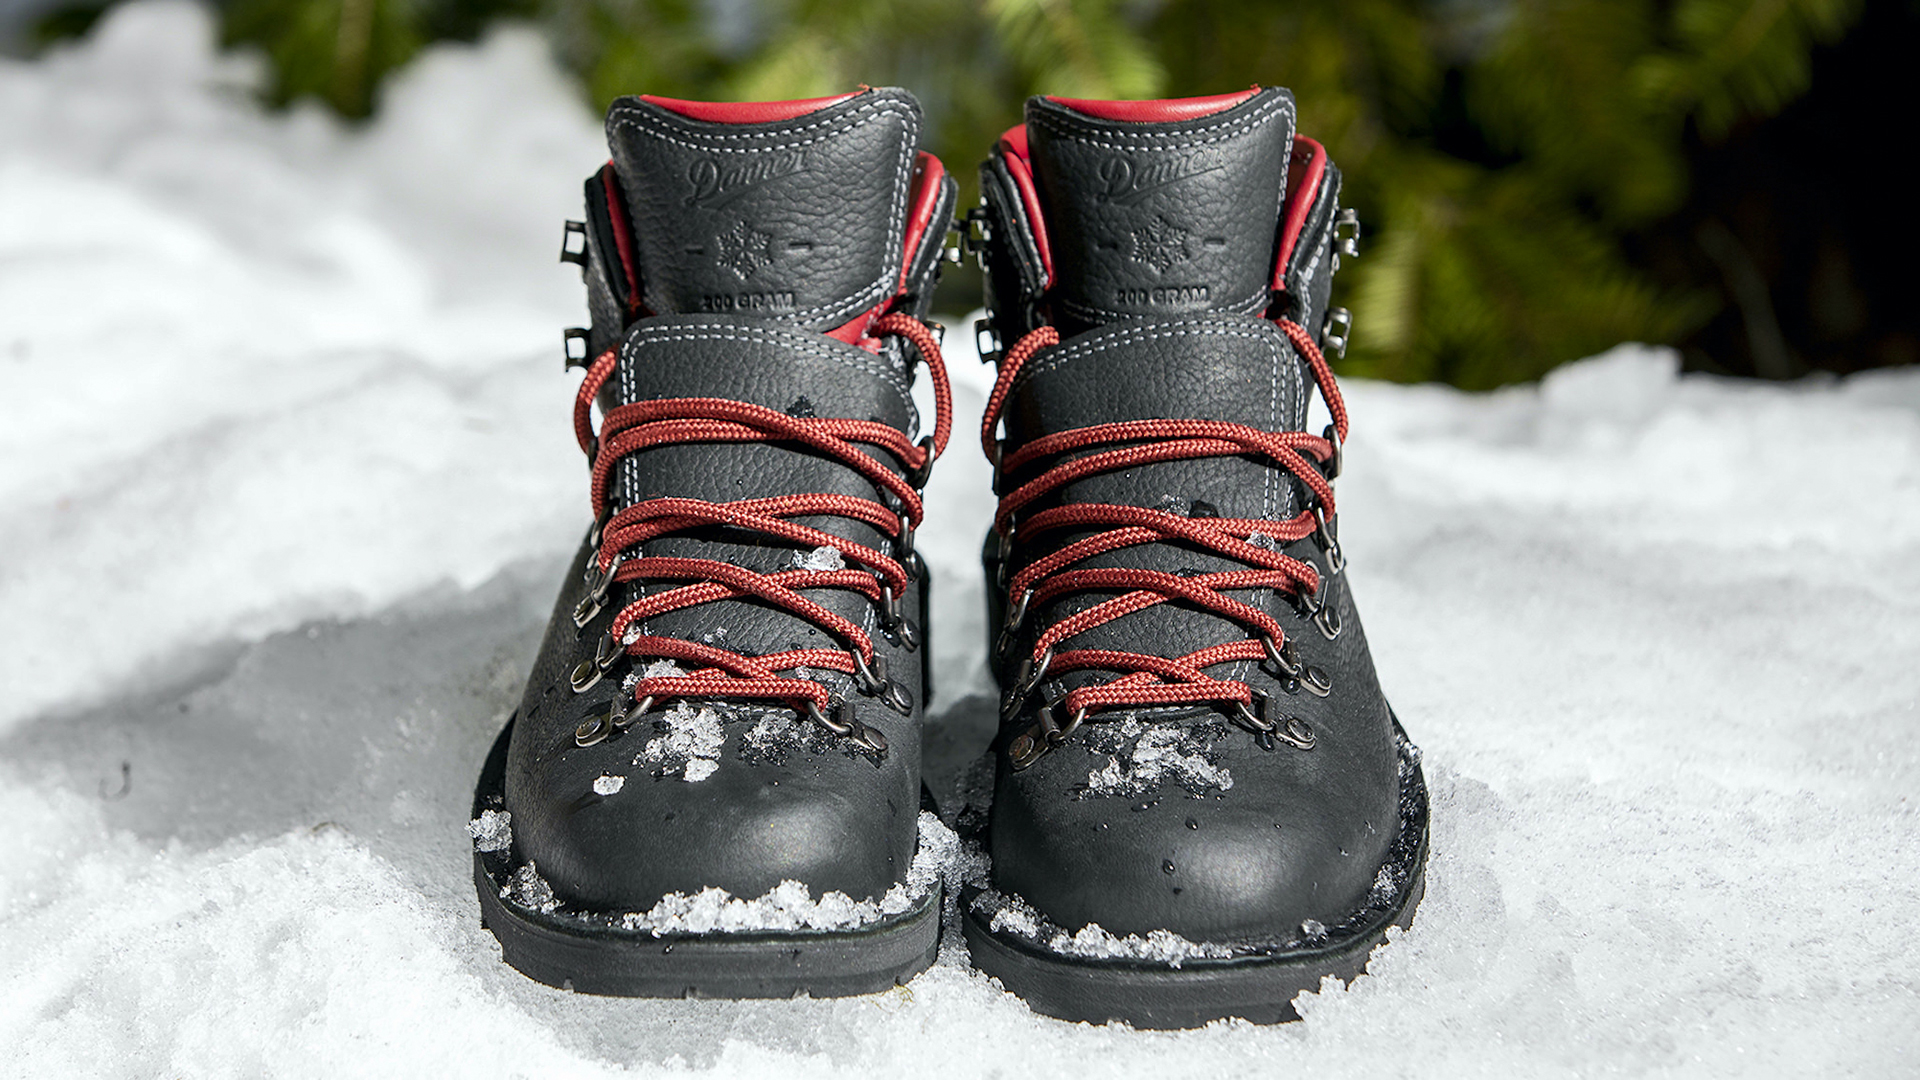 Thinsulate insulated hunting boots by Danner